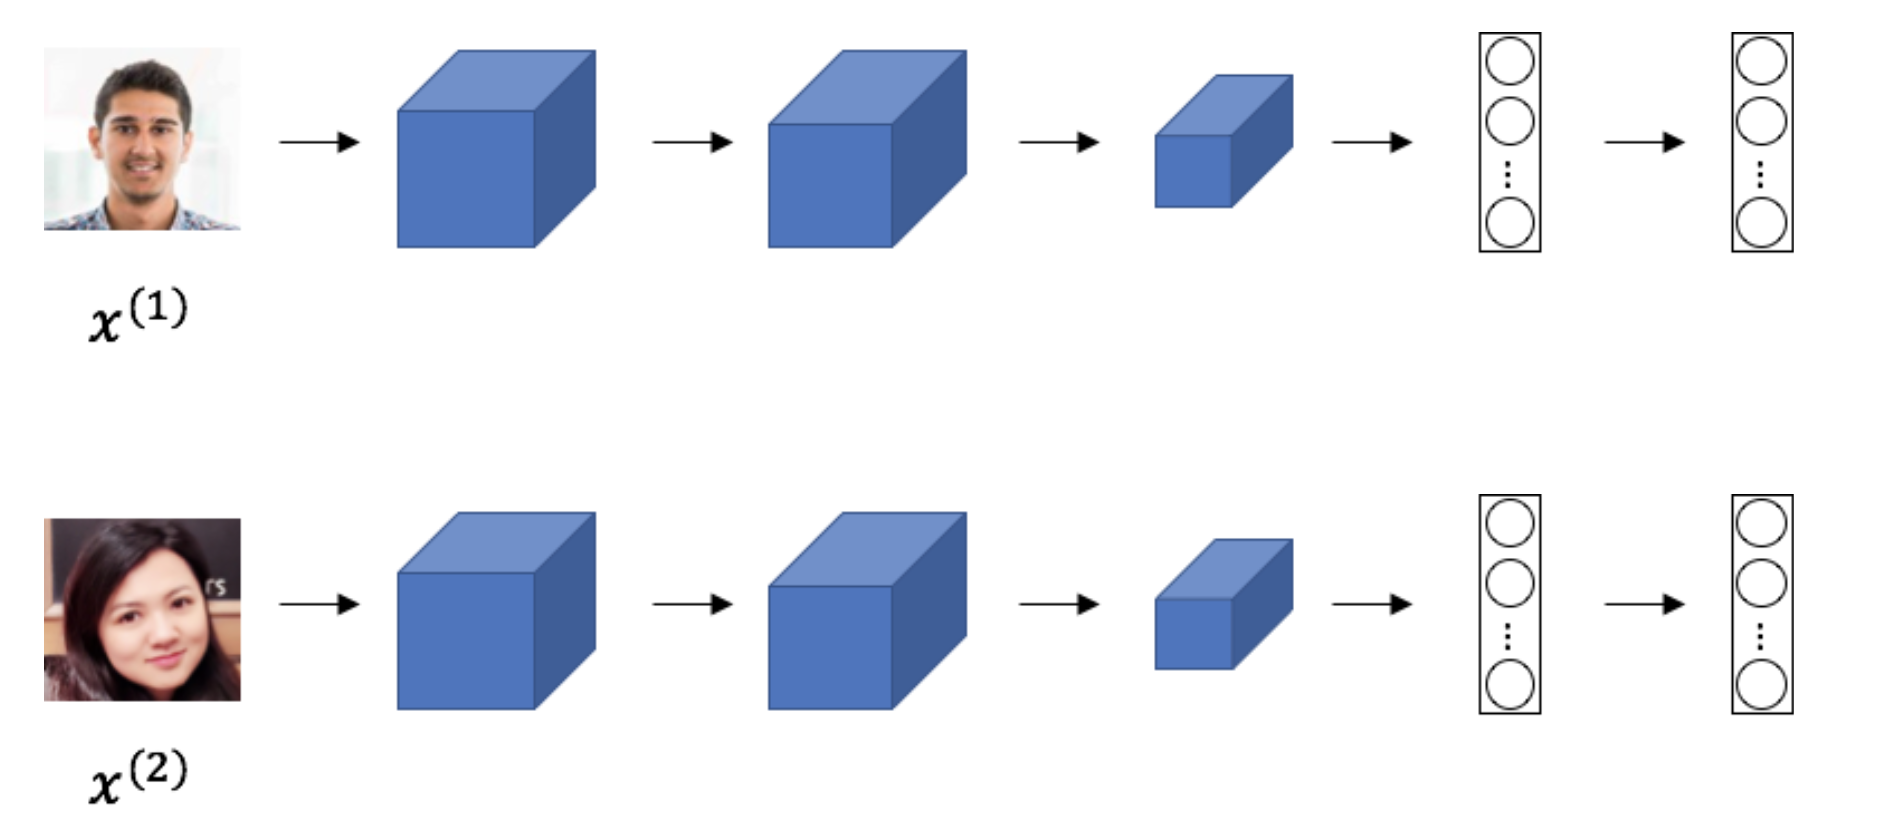 Figure 1 - Siamese network for facial recognition